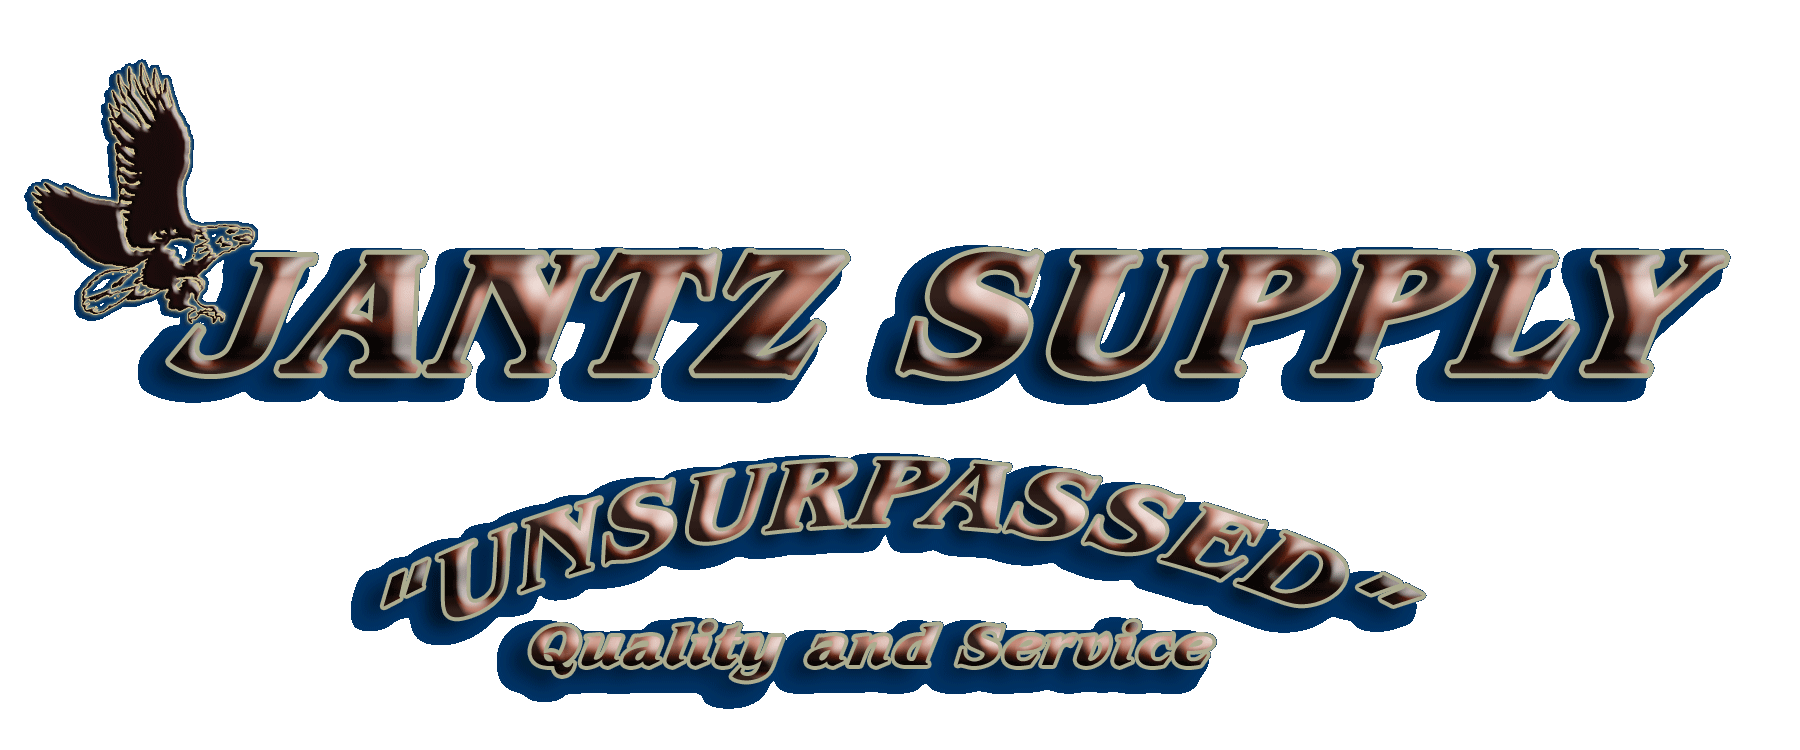 Jantz Supply The leader in Knife Making Supplies